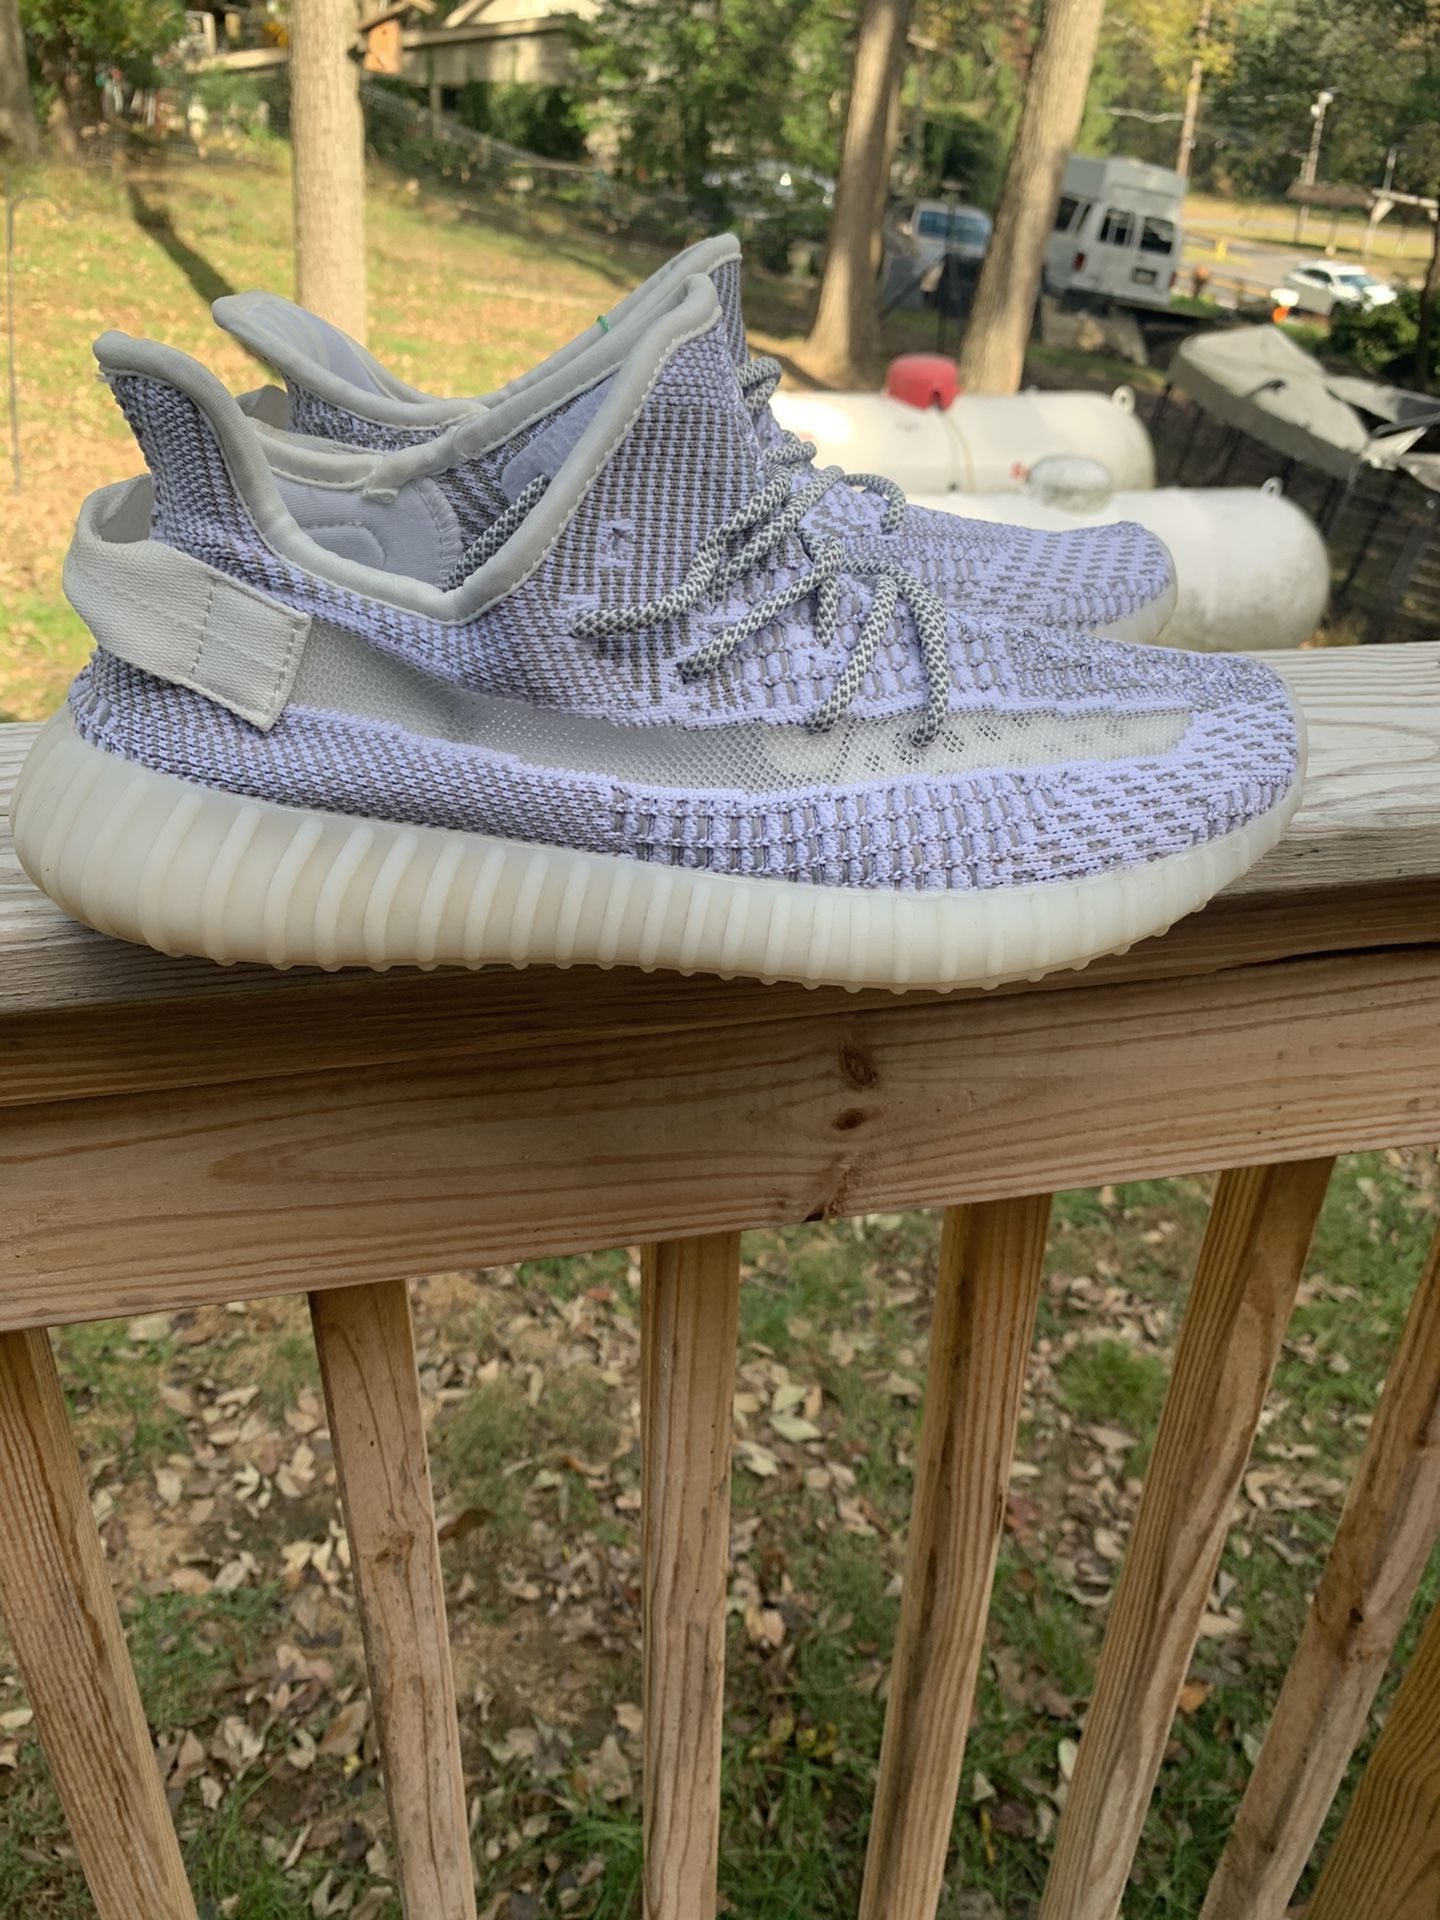 Adidas Yeezy Boost 350 v2 Static “Non Reflective” *Size 11*